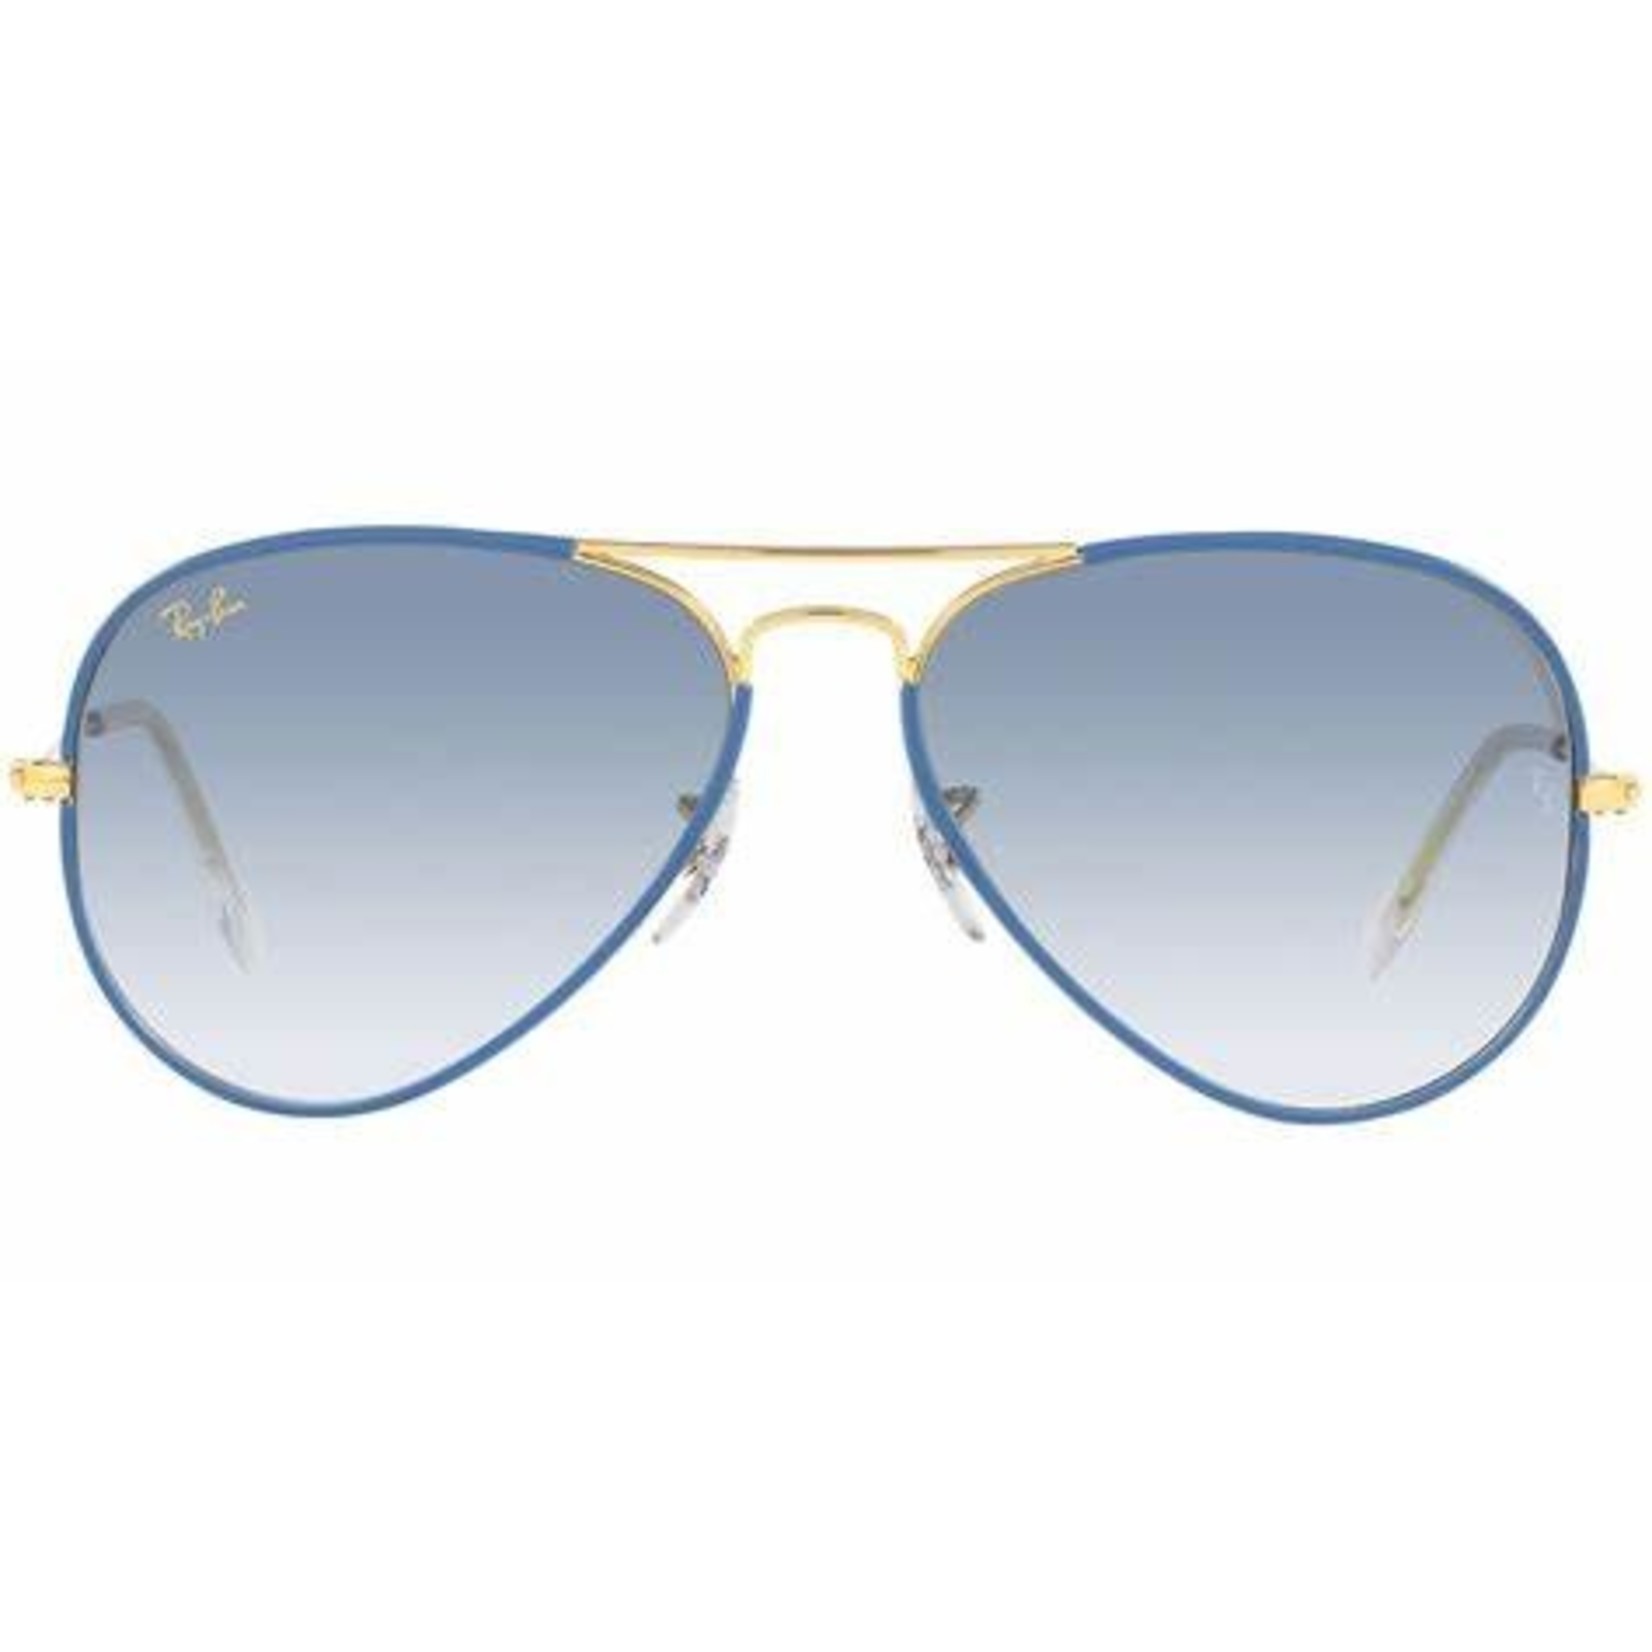 RAY BAN AVIATOR FULL COLOR LIGHT BLUE ON LEGEND GOLD W/ CLEAR GRADIENT BLUE